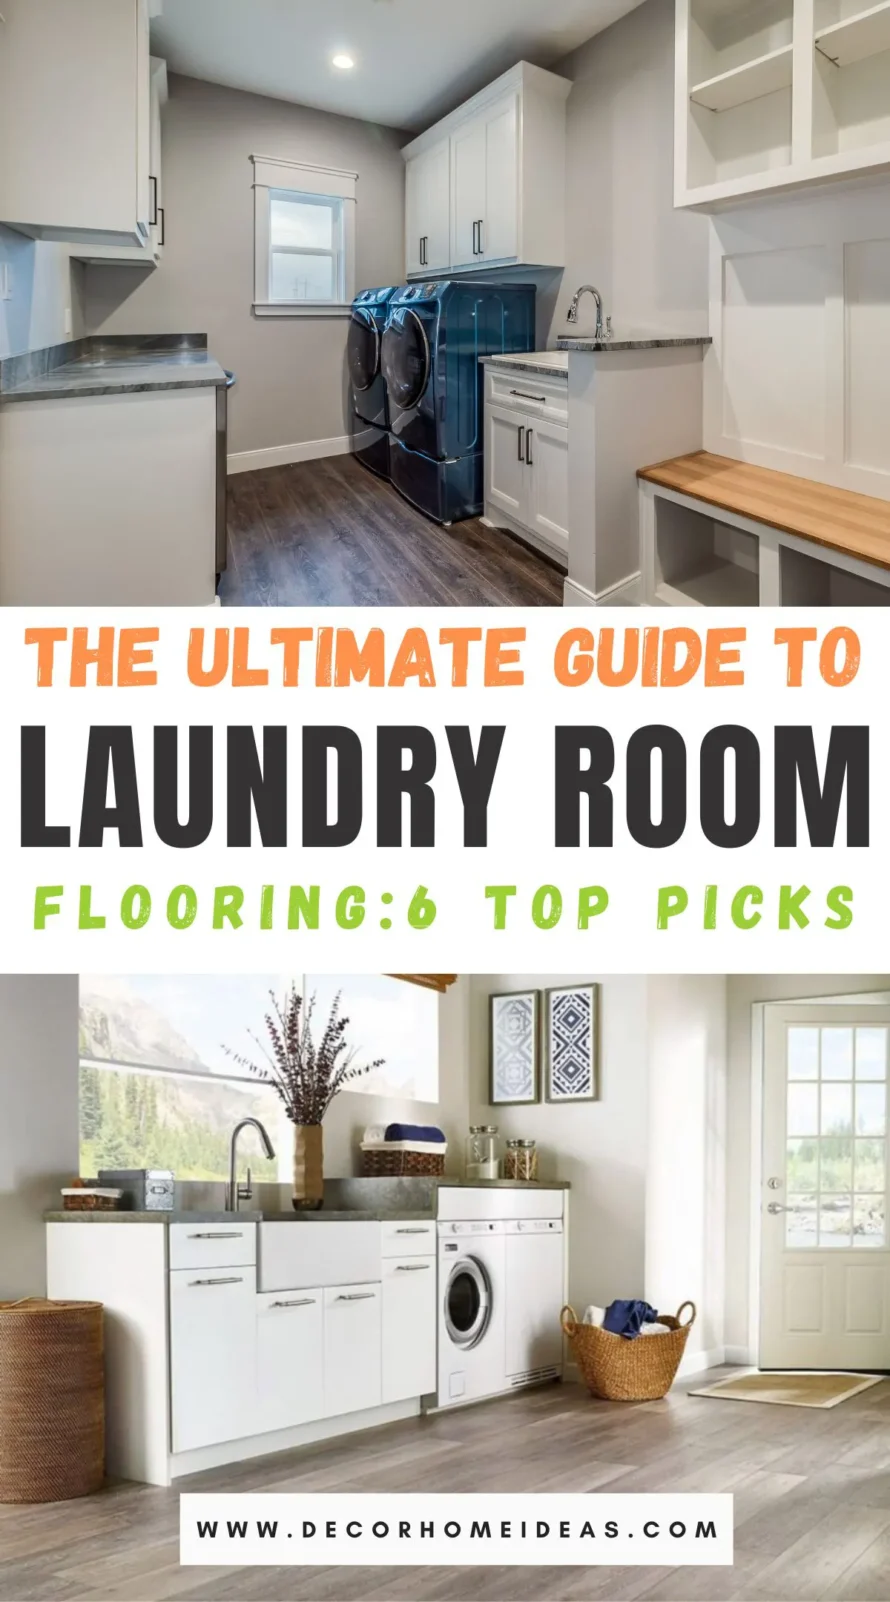 Discover the perfect foundation for your laundry room with our ultimate guide! Explore six top flooring options that combine durability, style, and moisture resistance. Find out which materials stand up best to wear and tear in this essential space.